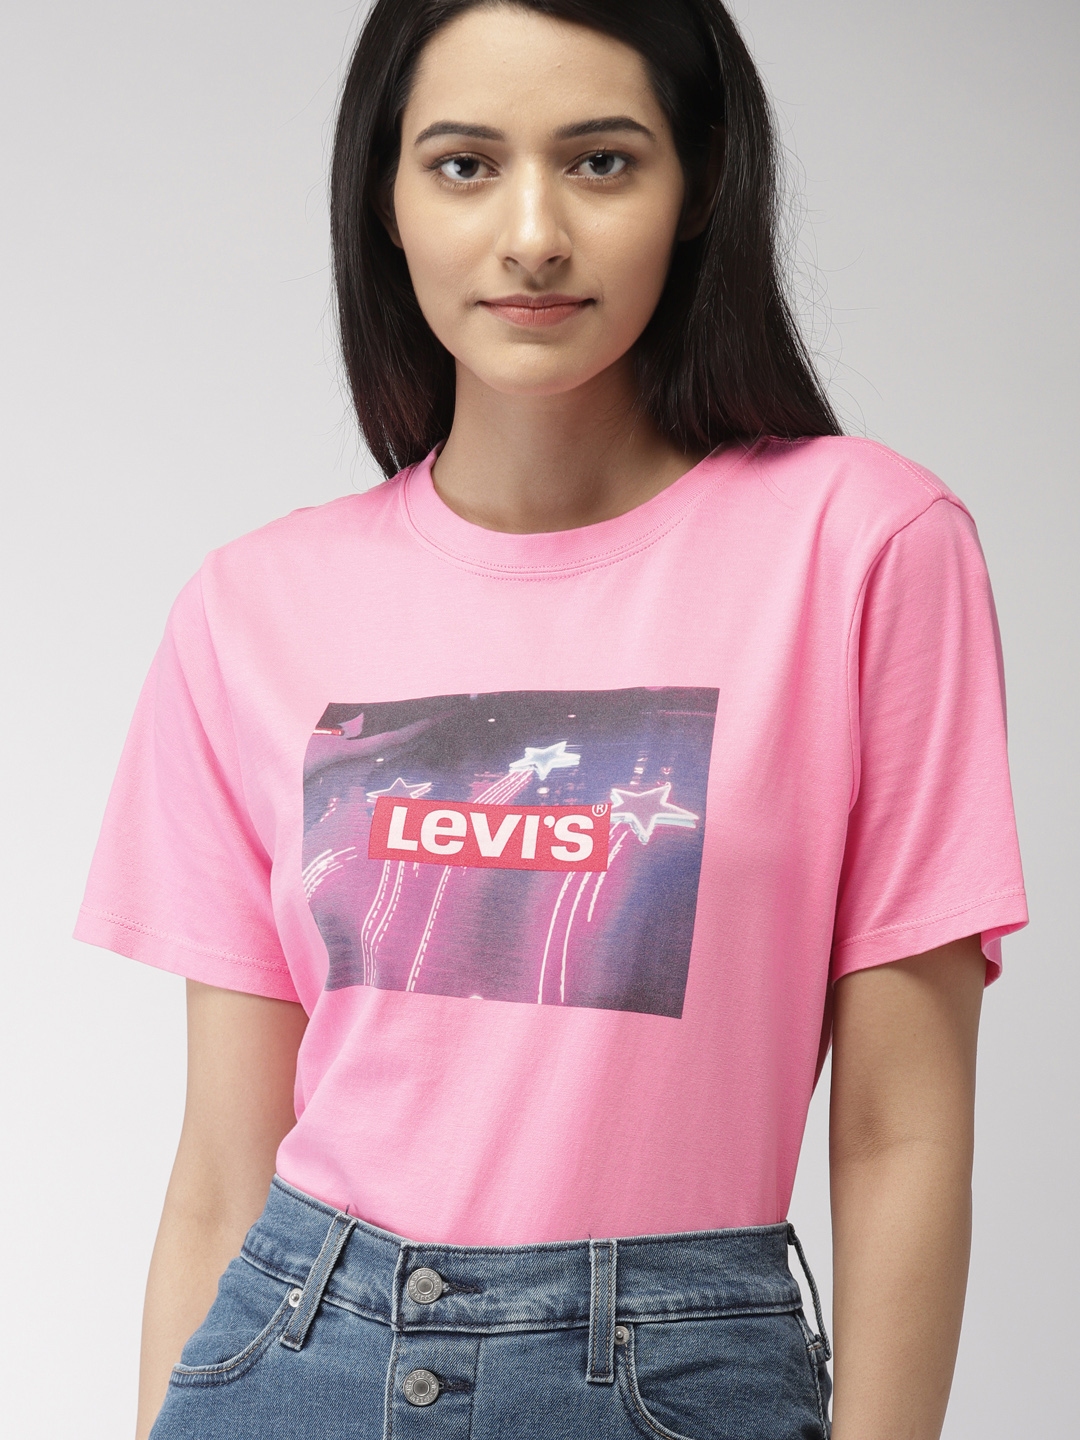 Buy Levis Women Pink Printed Round Neck T Shirt - Tshirts for Women 8315481  | Myntra